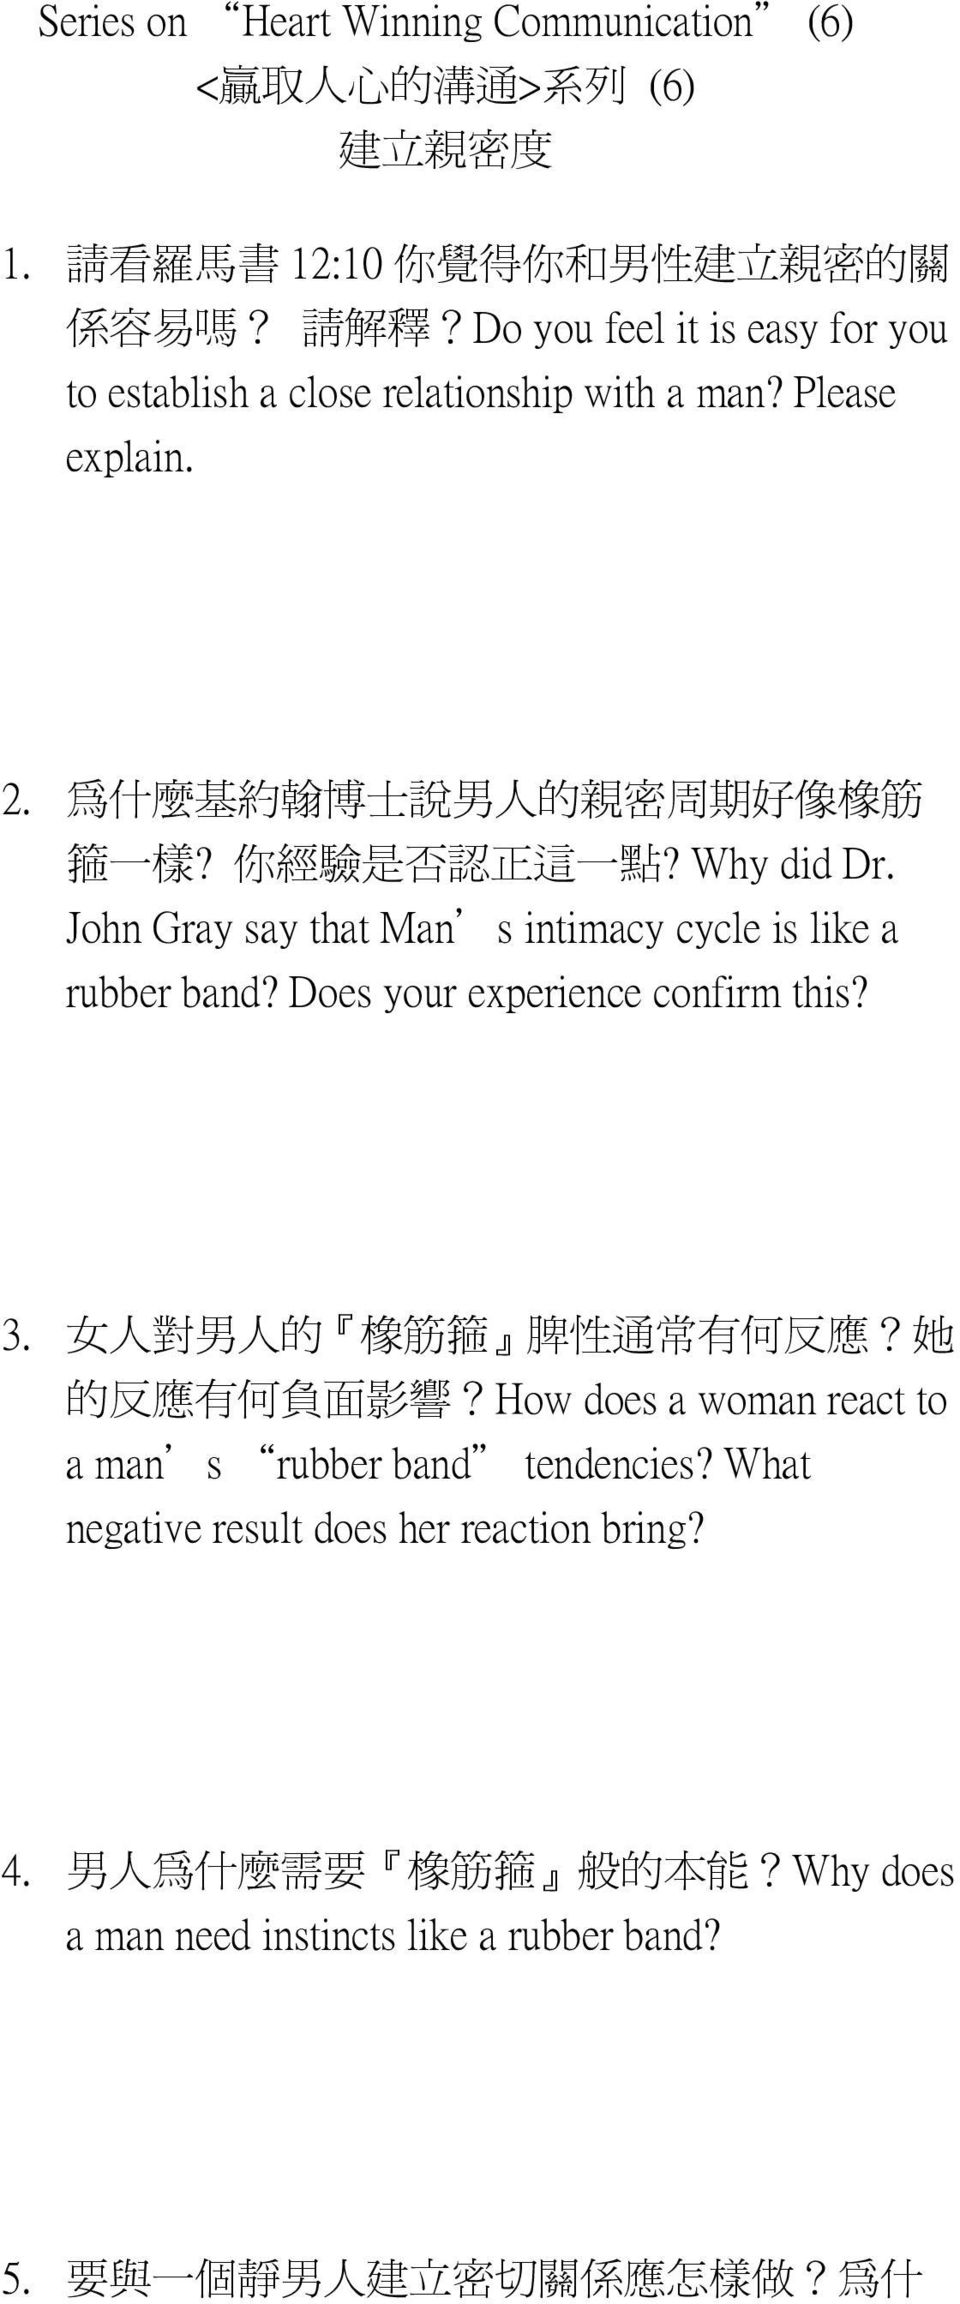 Why did Dr. John Gray say that Man s intimacy cycle is like a rubber band? Does your experience confirm this? 3. 女 人 對 男 人 的 橡 筋 箍 脾 性 通 常 有 何 反 應? 她 的 反 應 有 何 負 陎 影 響?